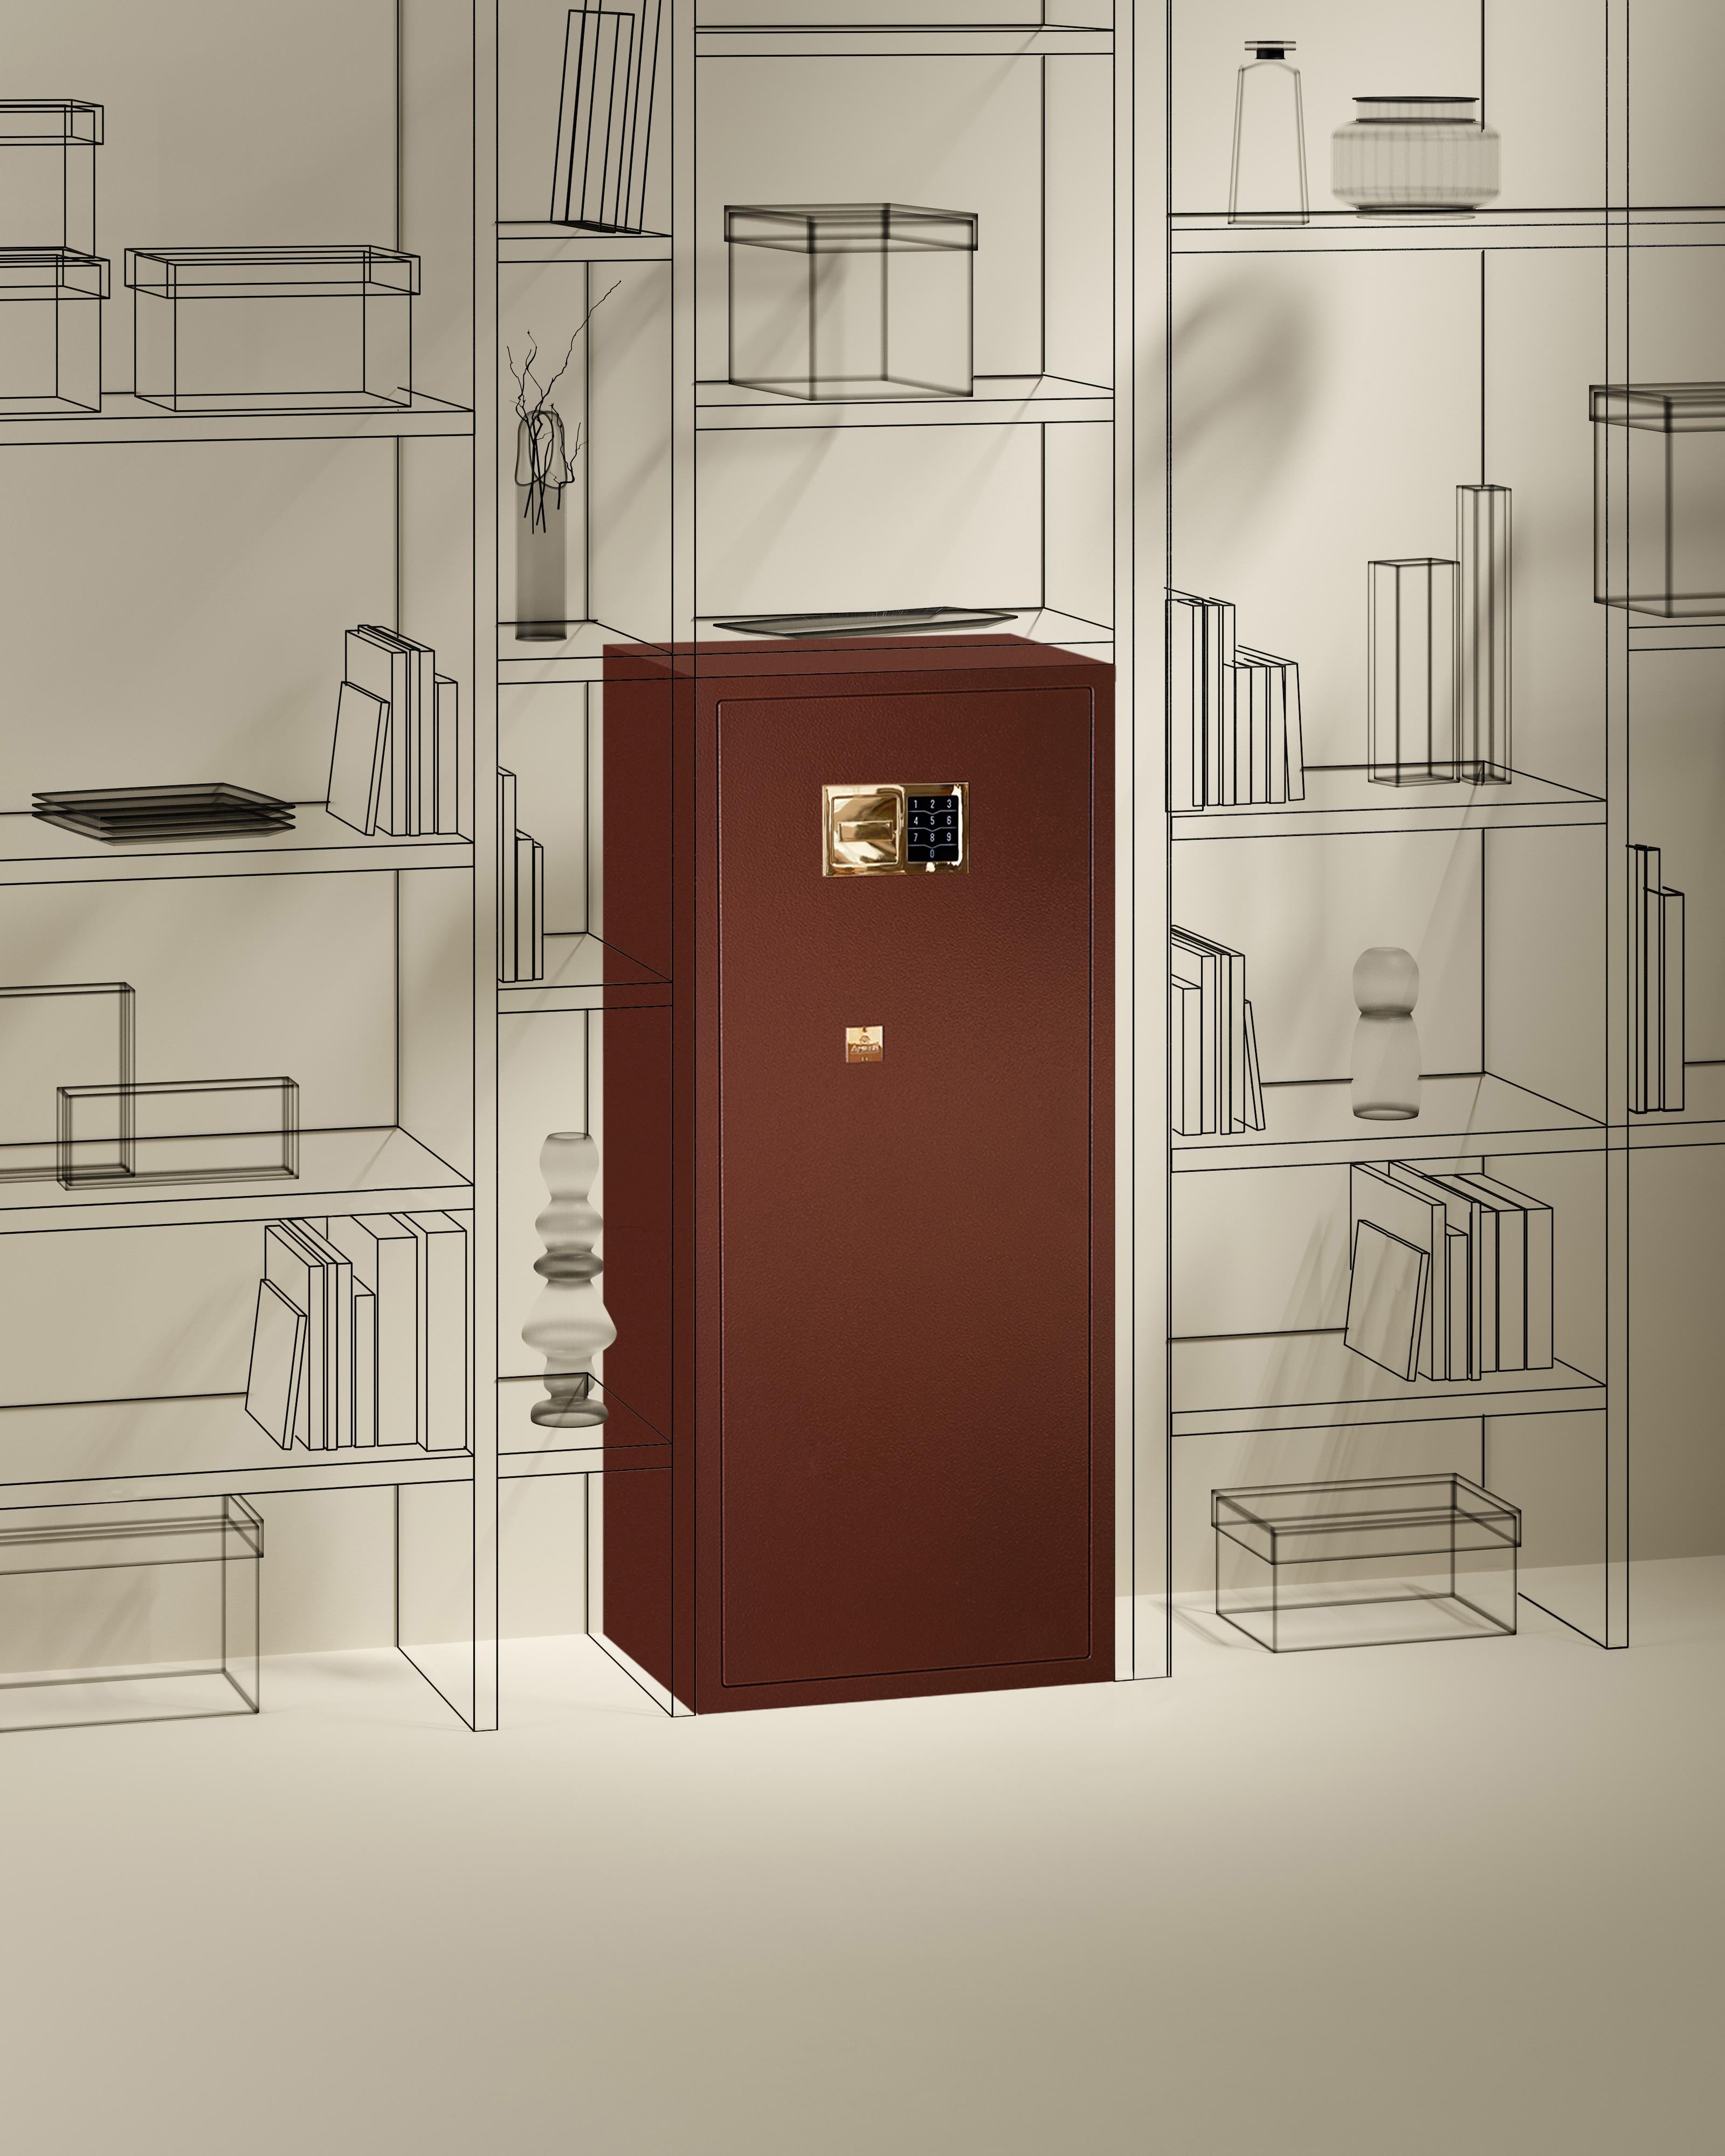 Metal safe varnished only in front for recessed placement in existing furniture. Opening with digital Touch Keypad and emergency key system. Available with watch winders, entirely made in Switzerland.

  